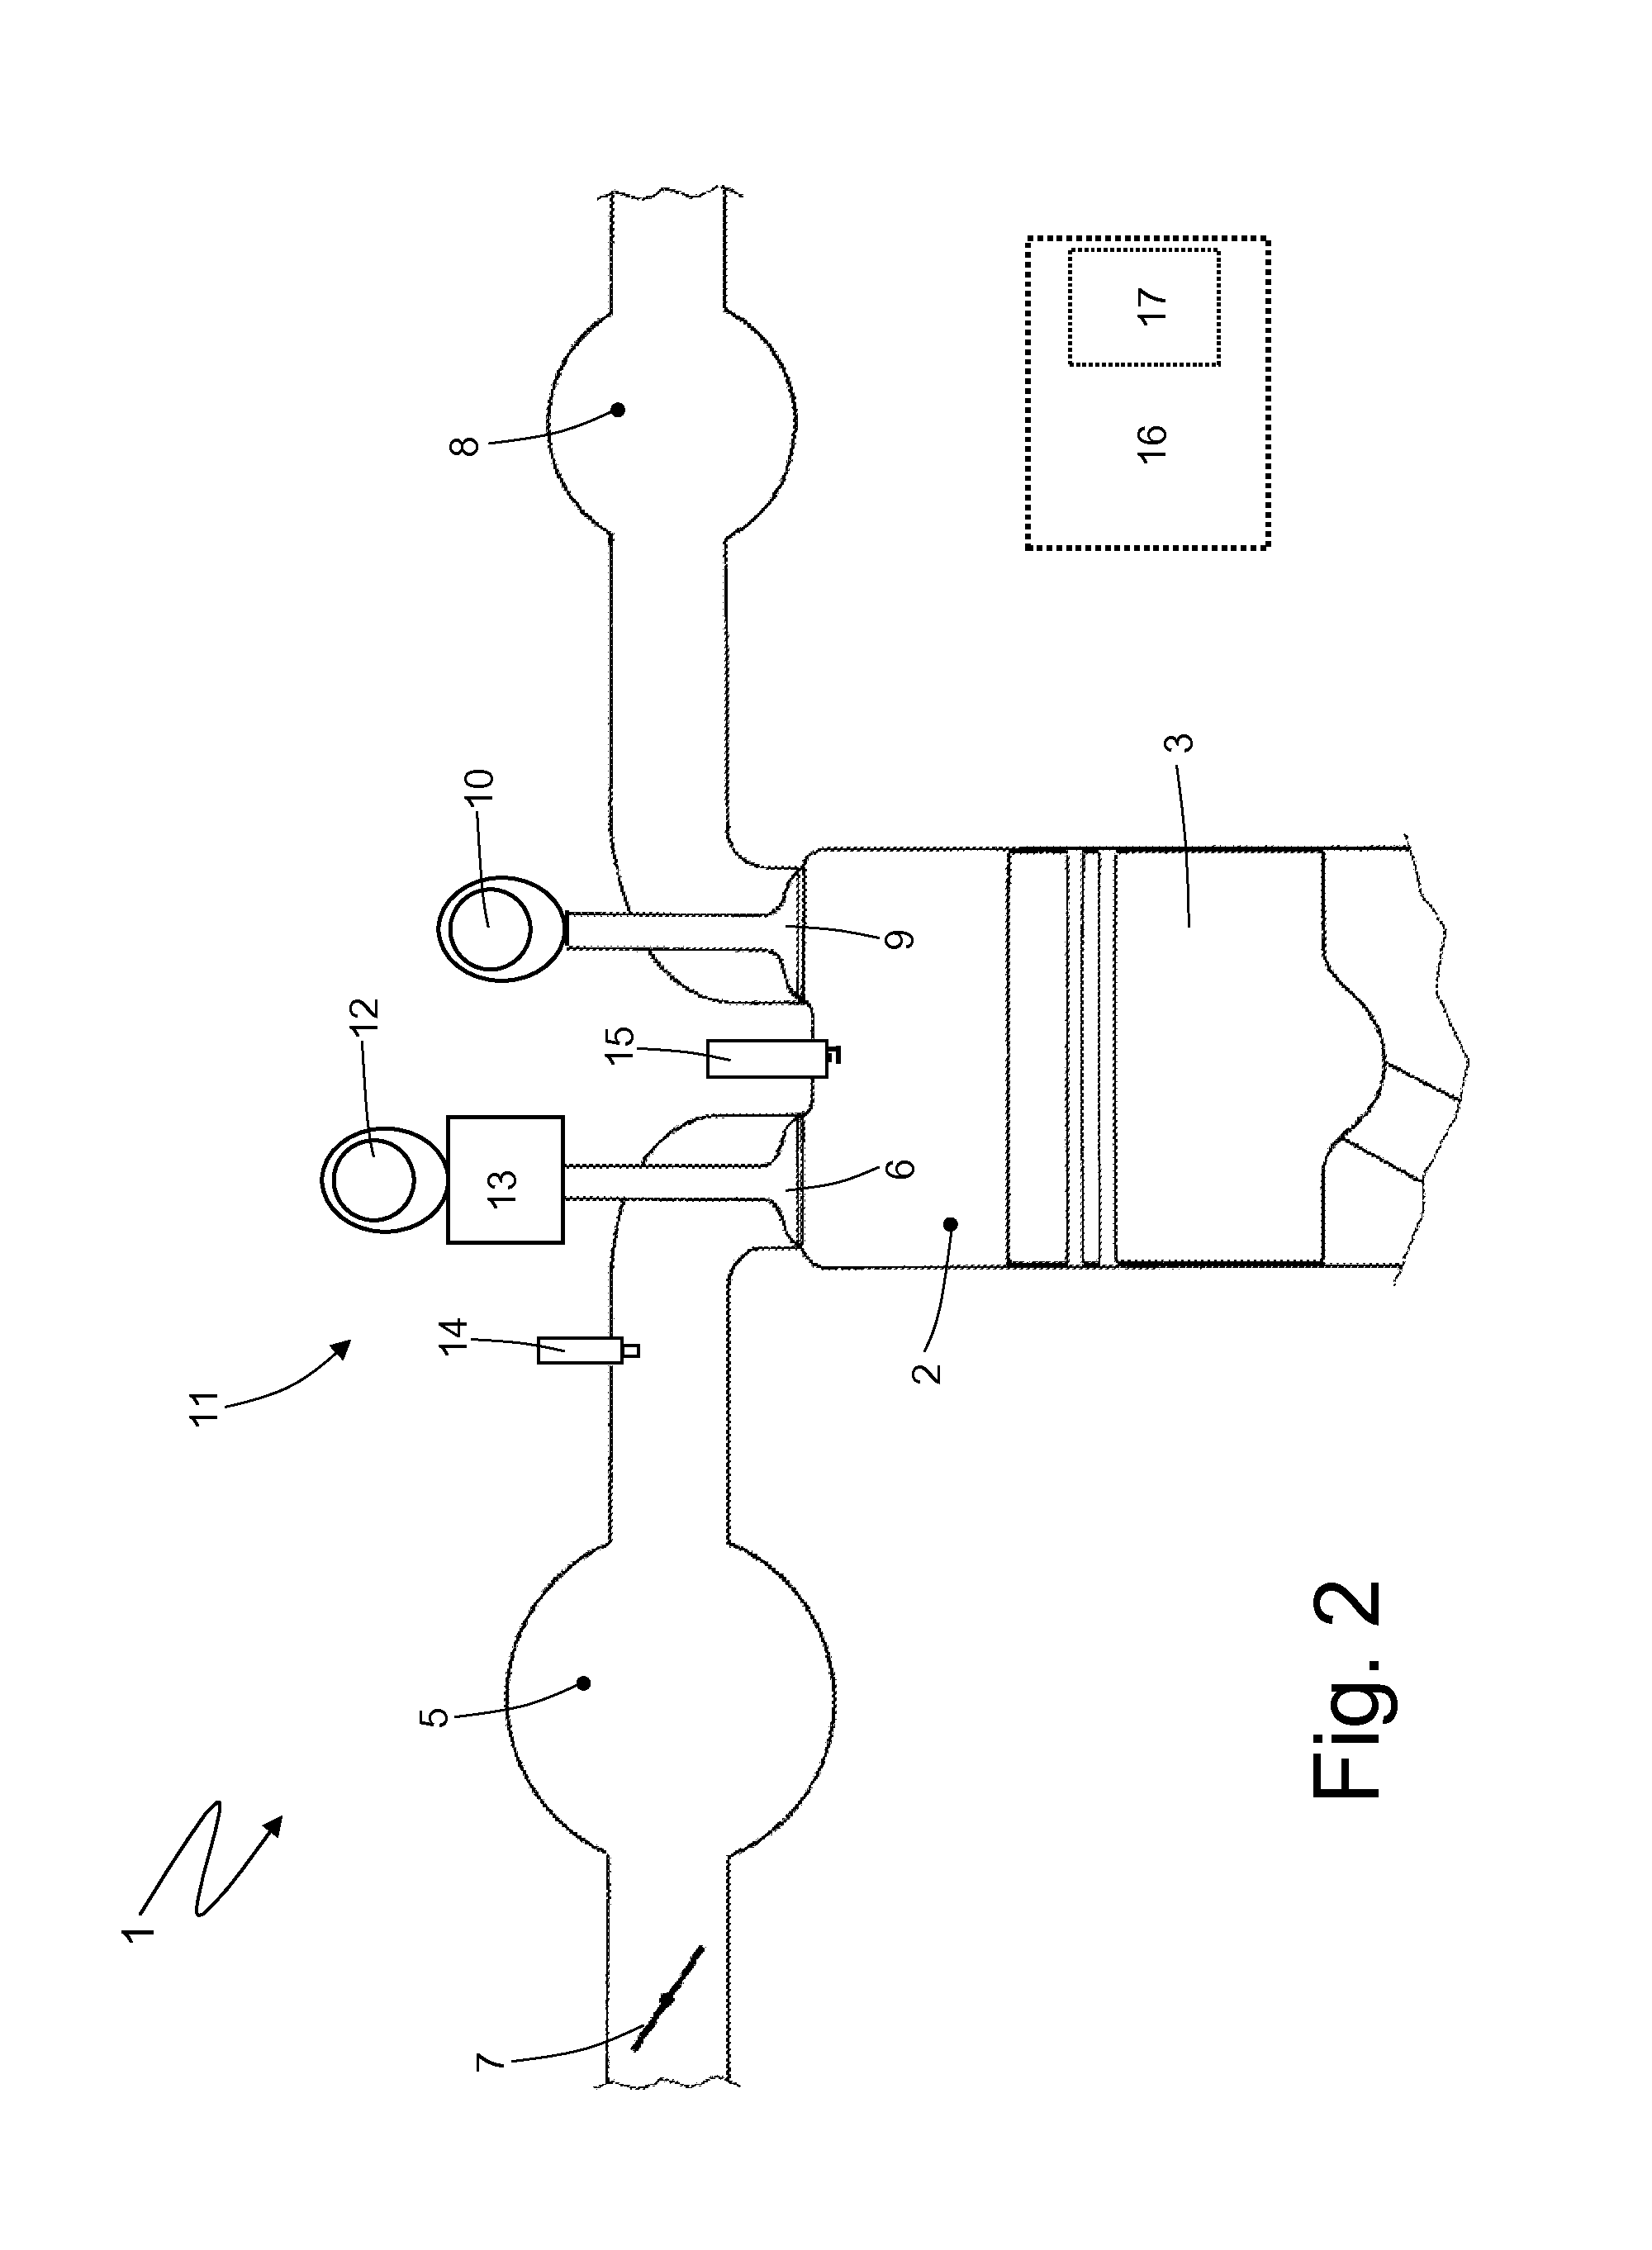 Method of controlling knocking in an internal combustion engine equipped with a device for controlling the opening of inlet valves